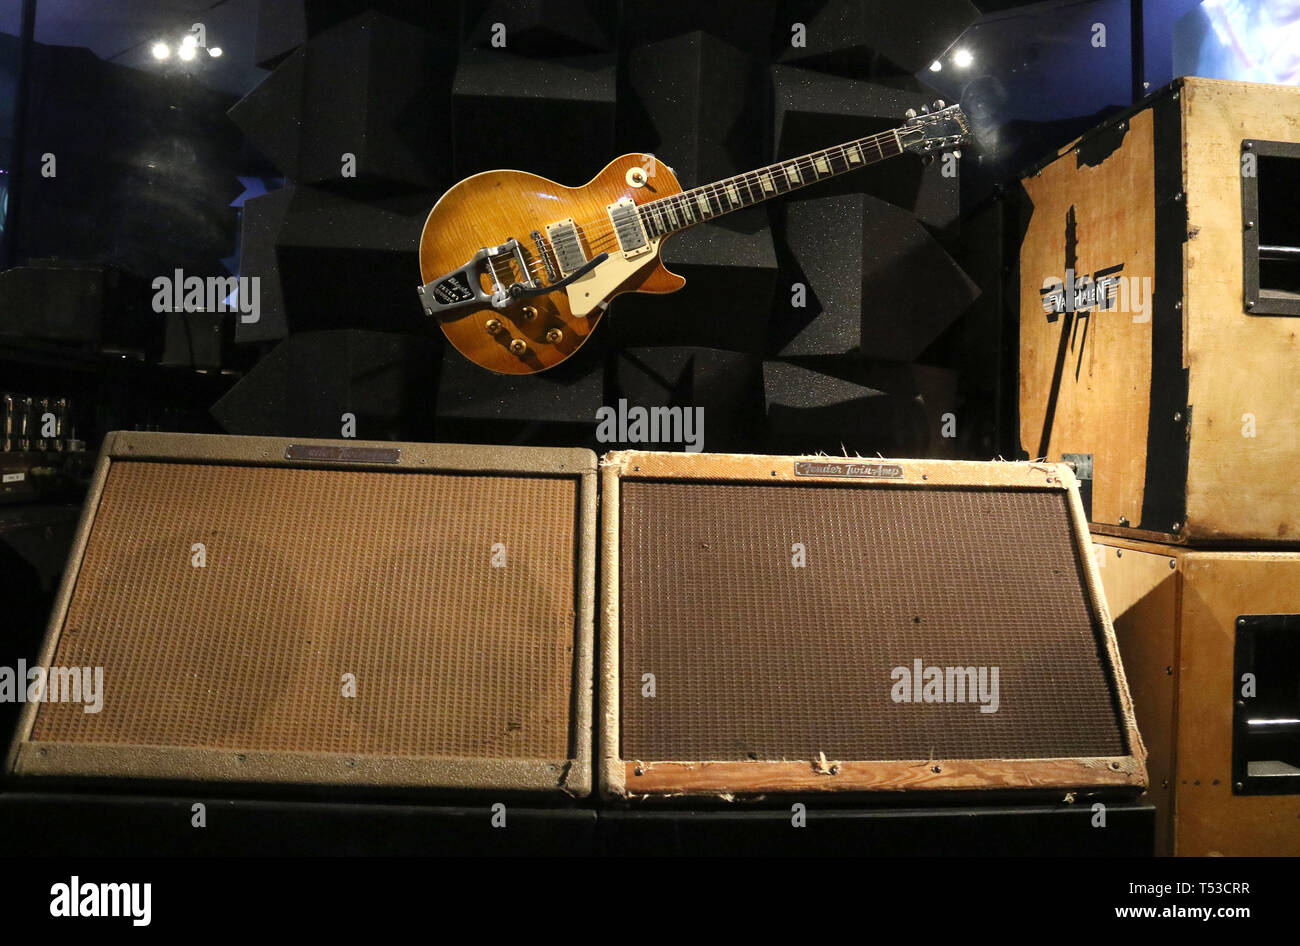 April 20, 2019 - New York City, New York, U.S. - KEITH RICHARD'S RIG, LES  PAUL STANDARD Electric Guitar, Combo Amplifiers on display at the 'Play It  Loud: Instruments of Rock and